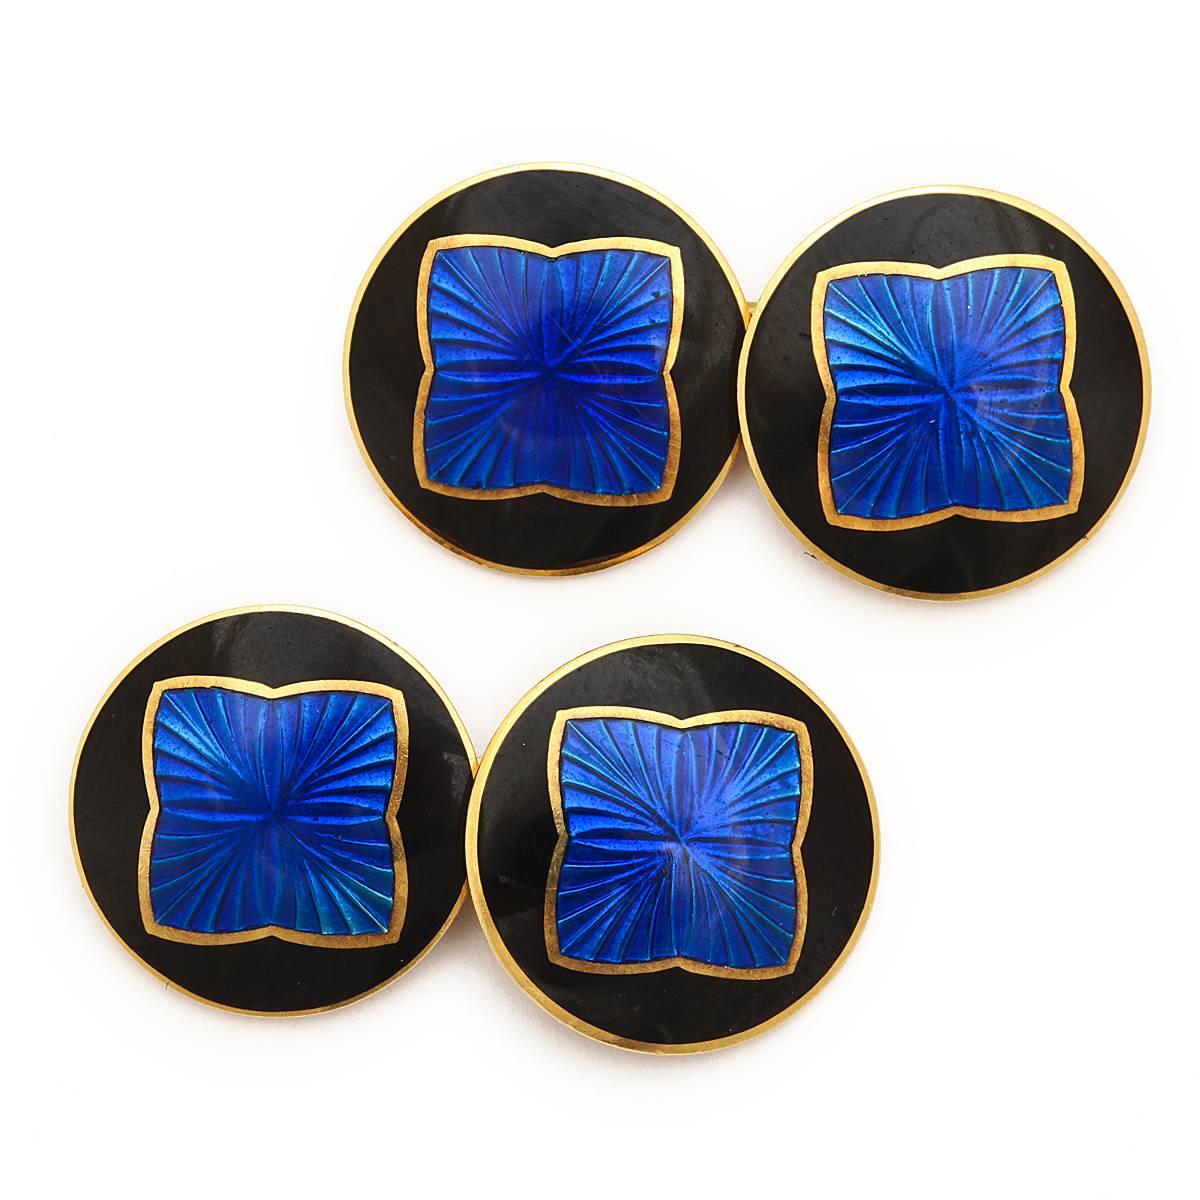 14k gold double cufflinks with an opaque black enamel ground centered by a blue guilloché enamel quatrefoil.

By Riker Bros., Newark ca. 1900

Newark, NJ became the center of American jewelry production early in the nineteenth century. New